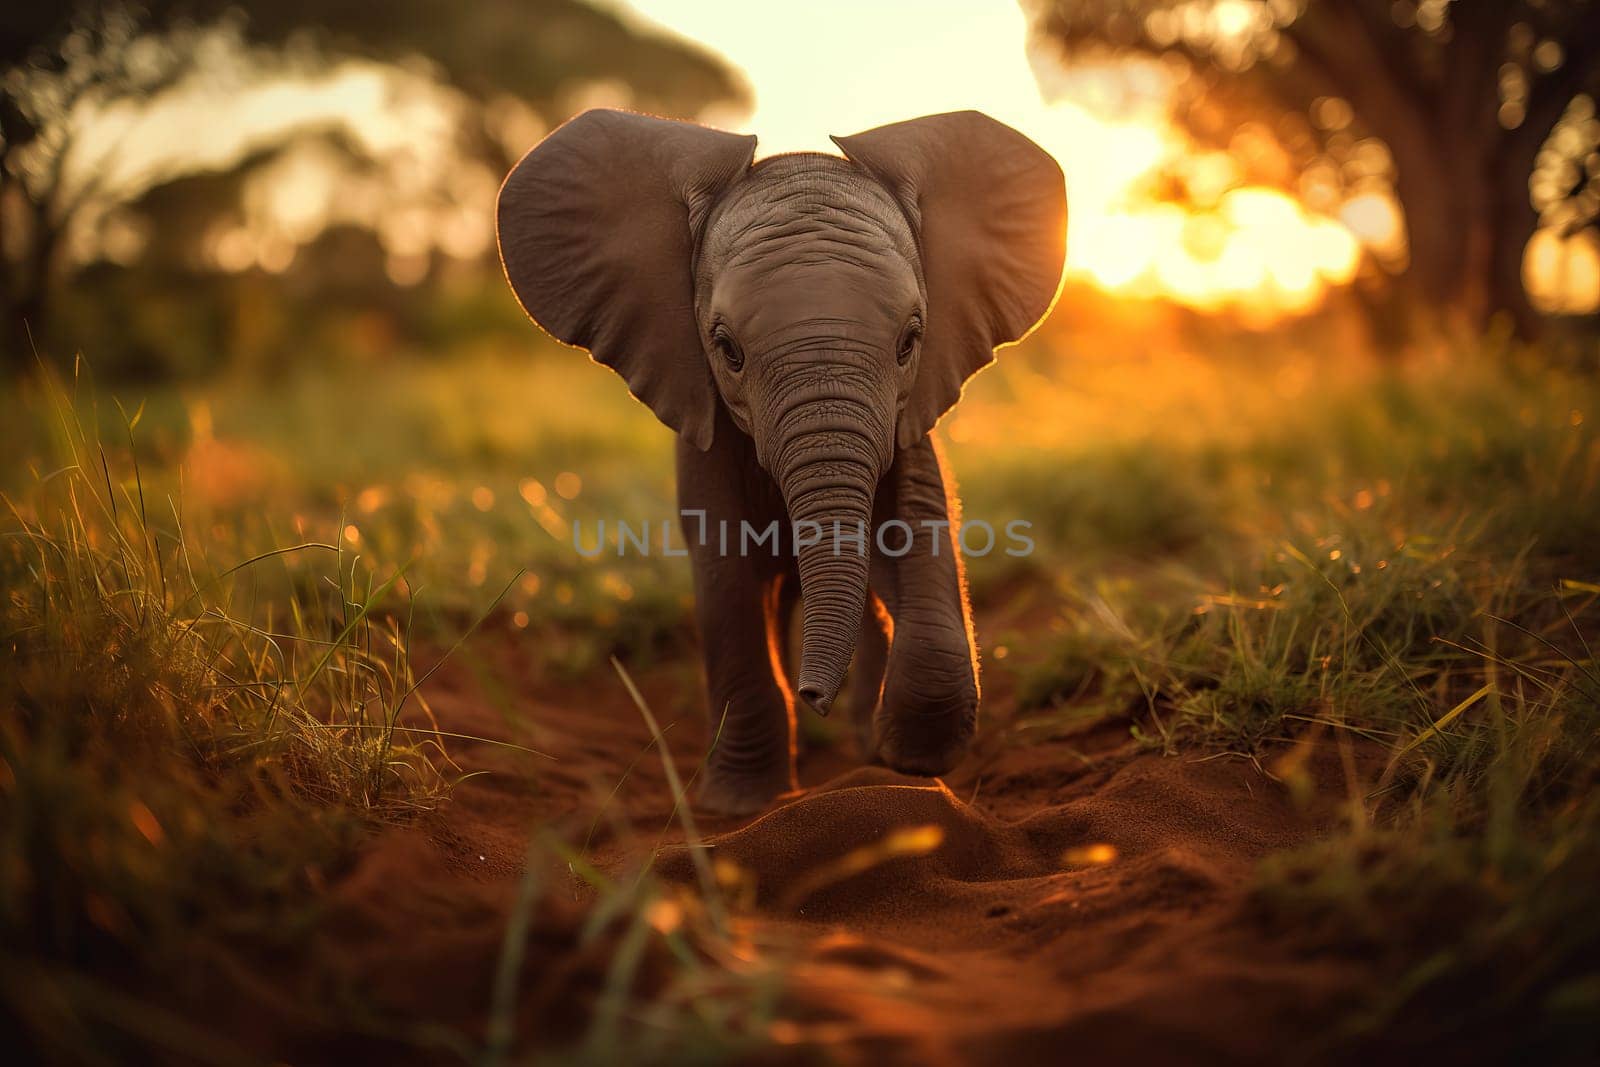 Baby elephant walking majestically against the backdrop of a golden sunset